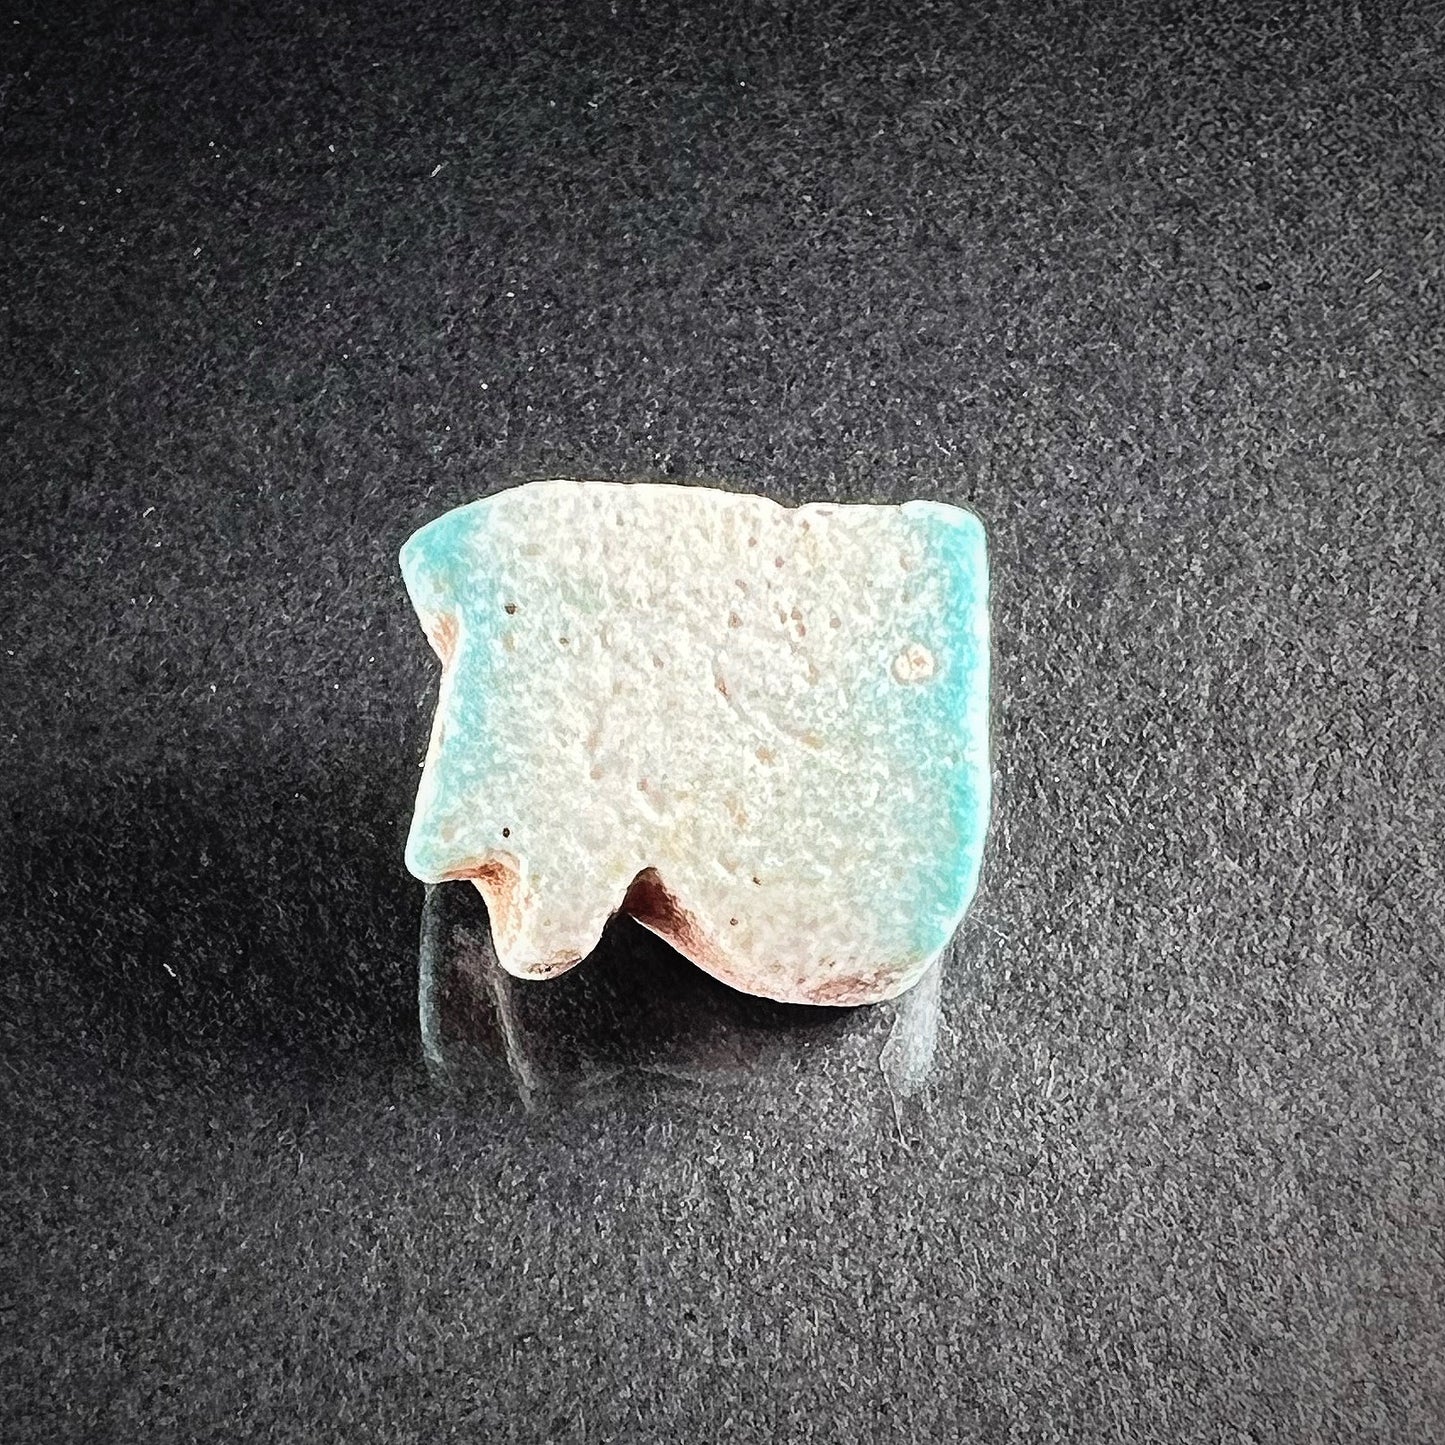  Wedjat-amulet from ancient Egypt made out of faience. Back side photo.